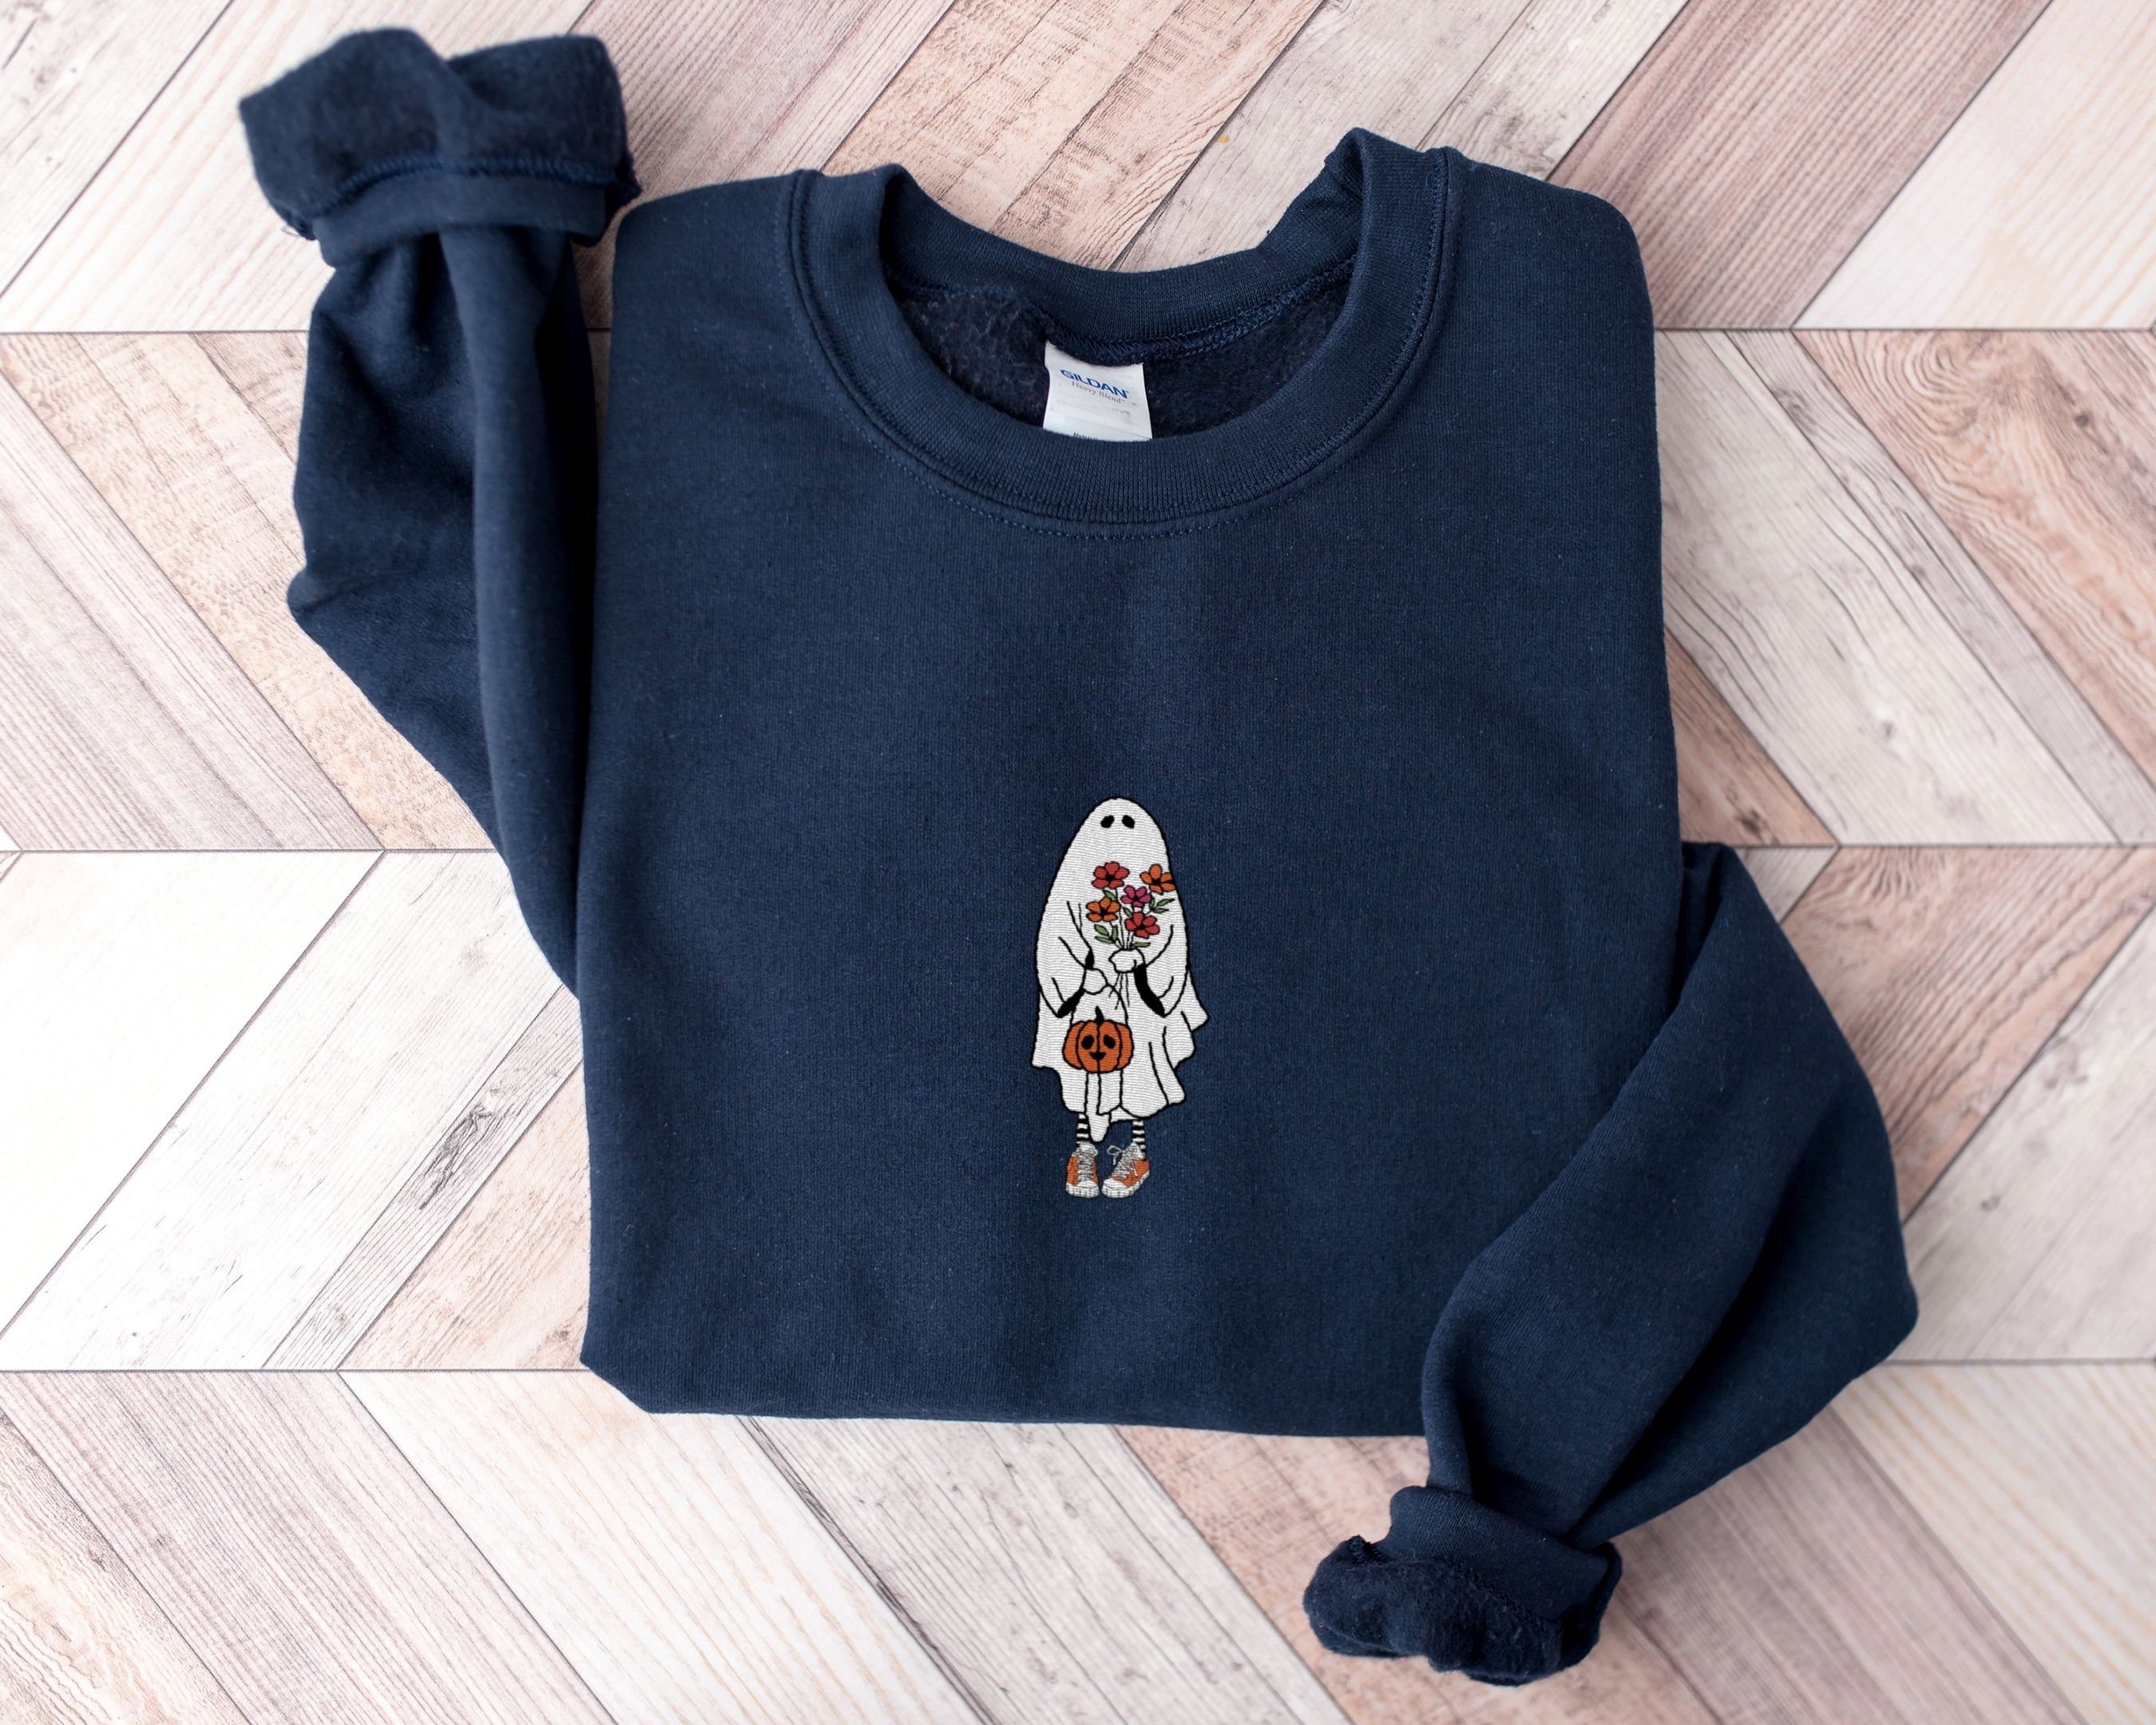 Discover Embroidered Ghost Sweatshirt | Vintage Halloween Sweatshirt | Embroidered Pumpkin Sweatshirt | Spooky Sweatshirt | Cute Halloween Apparel